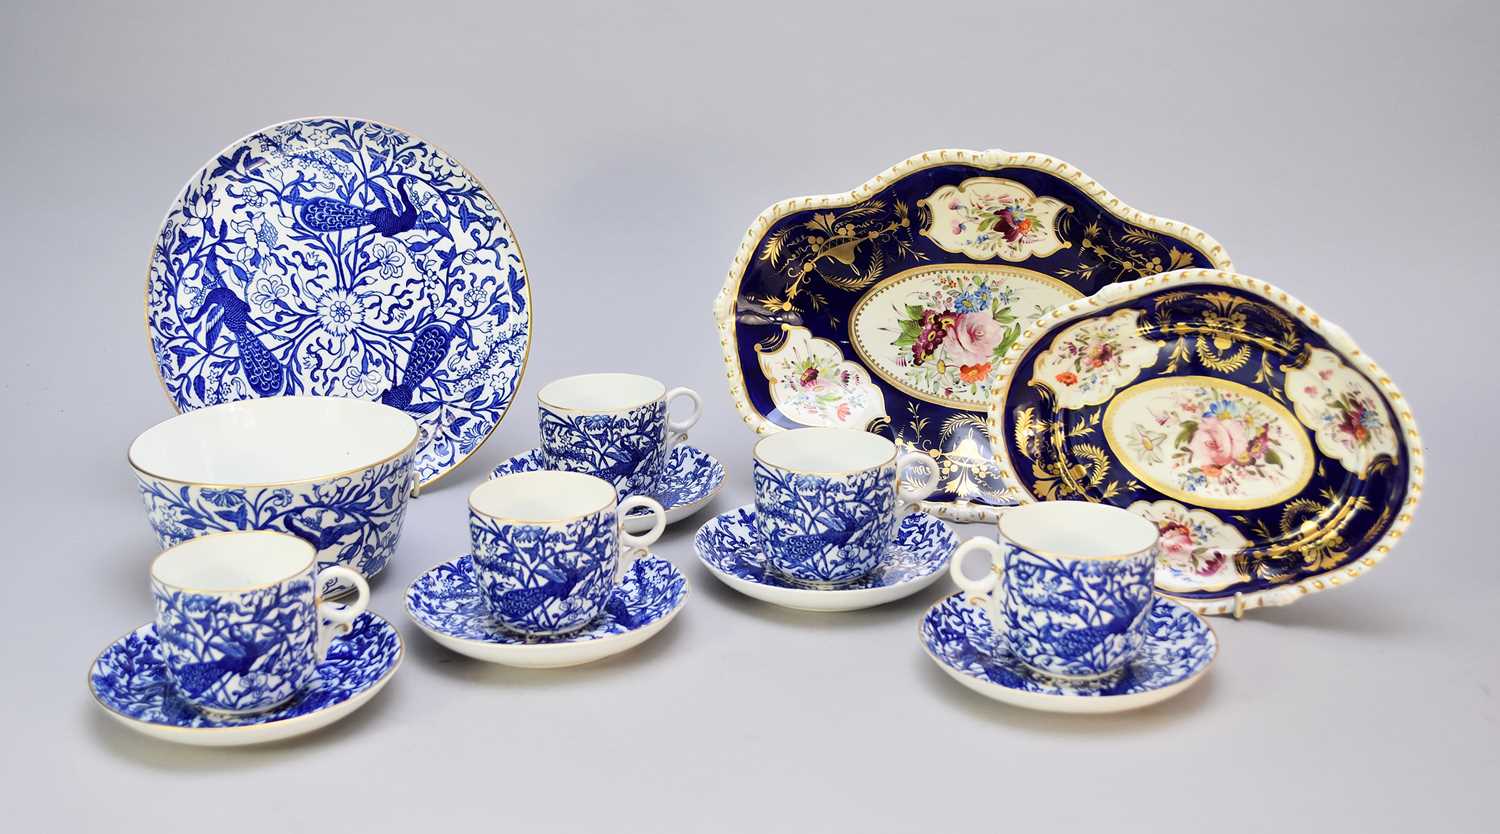 A Royal Crown Derby part service and two Derby plates